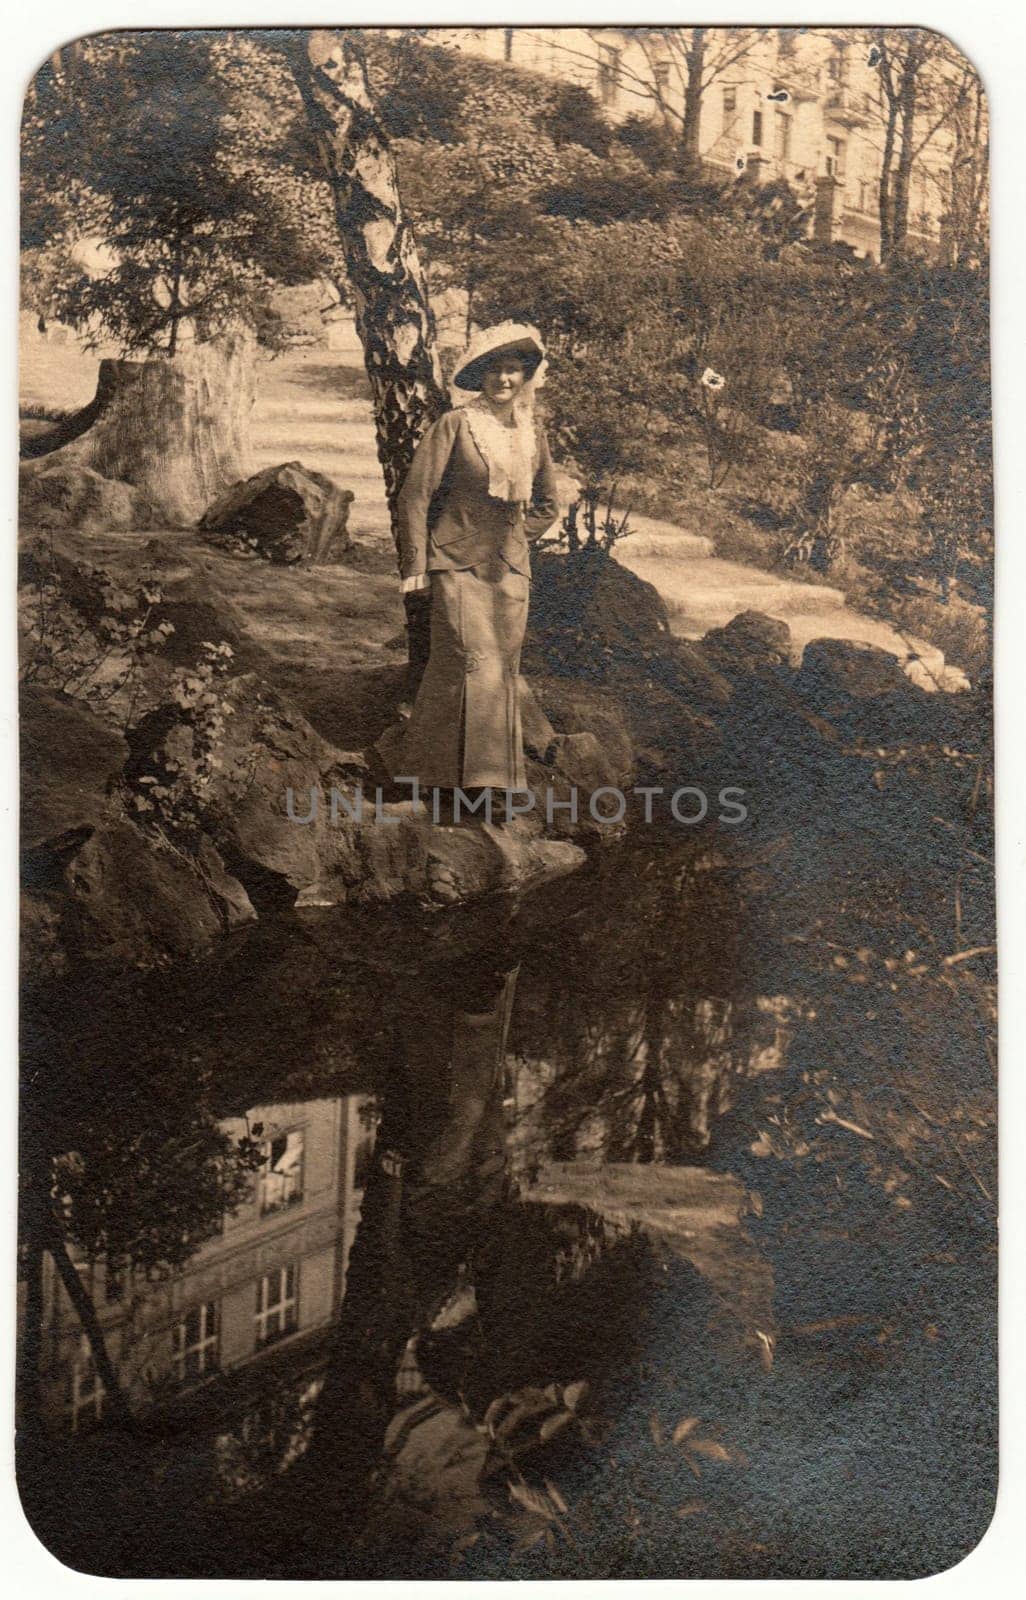 THE CZECHOSLOVAK REPUBLIC - CIRCA 1930s: Vintage photo shows woman wears an elegant dress and feather hat. The woman poses outdoors at the bank of river. Retro black and white photography. Circa 1960s.